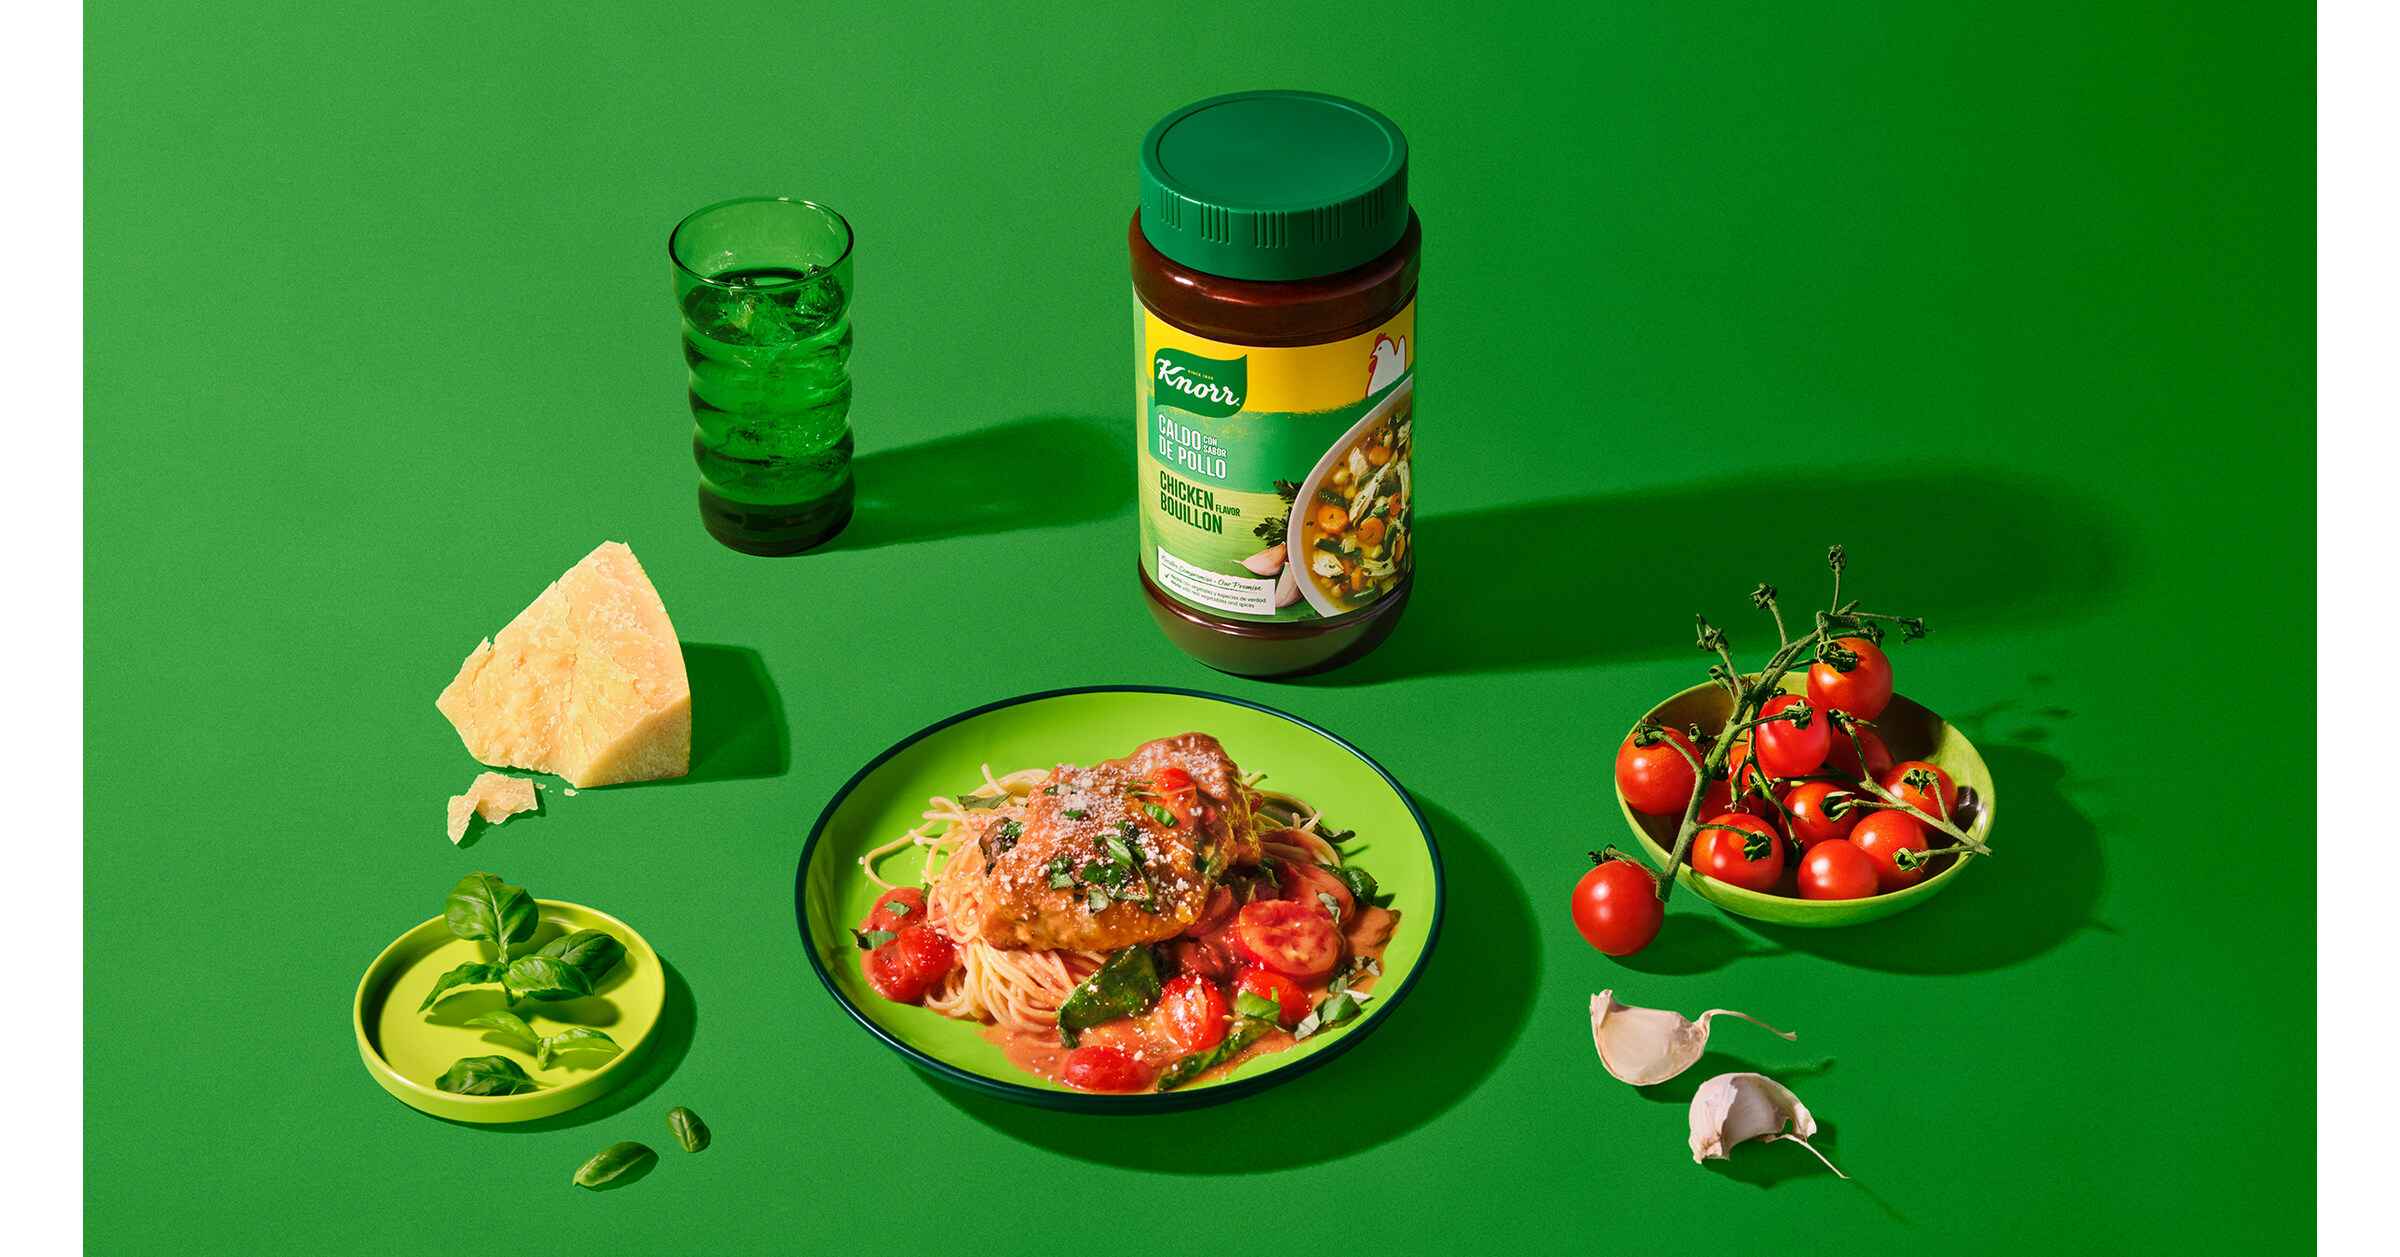 KNORR® AND CARDI B PRESENT TASTE COMBOS: THE NEWEST COMBO MEALS